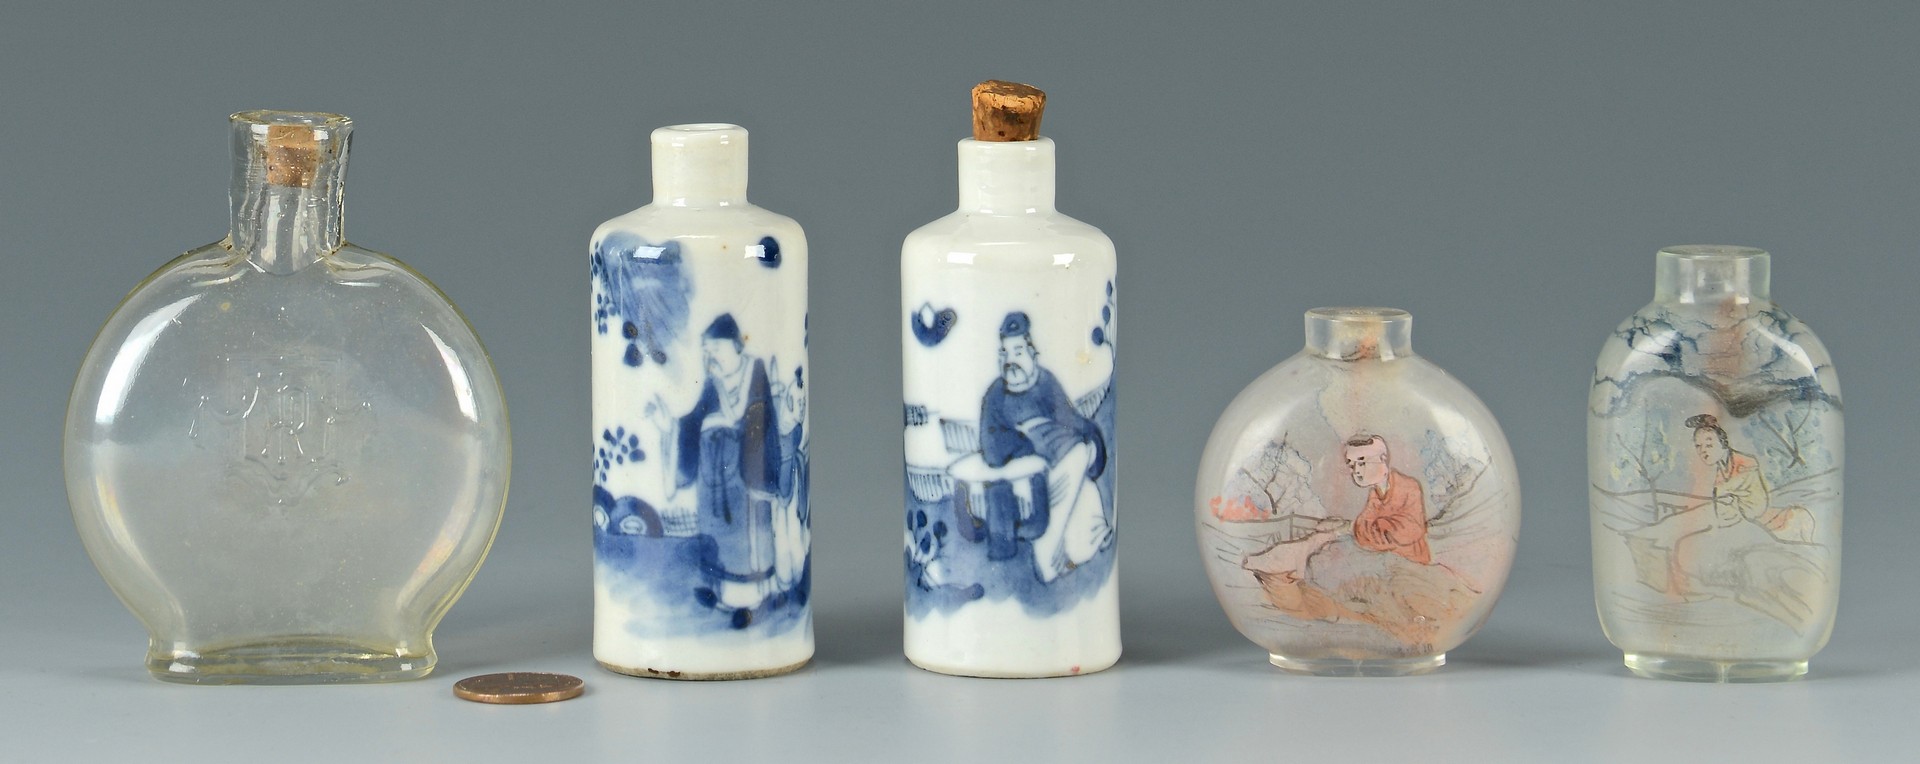 Lot 783: 4 Chinese Snuff Bottles + 1 other